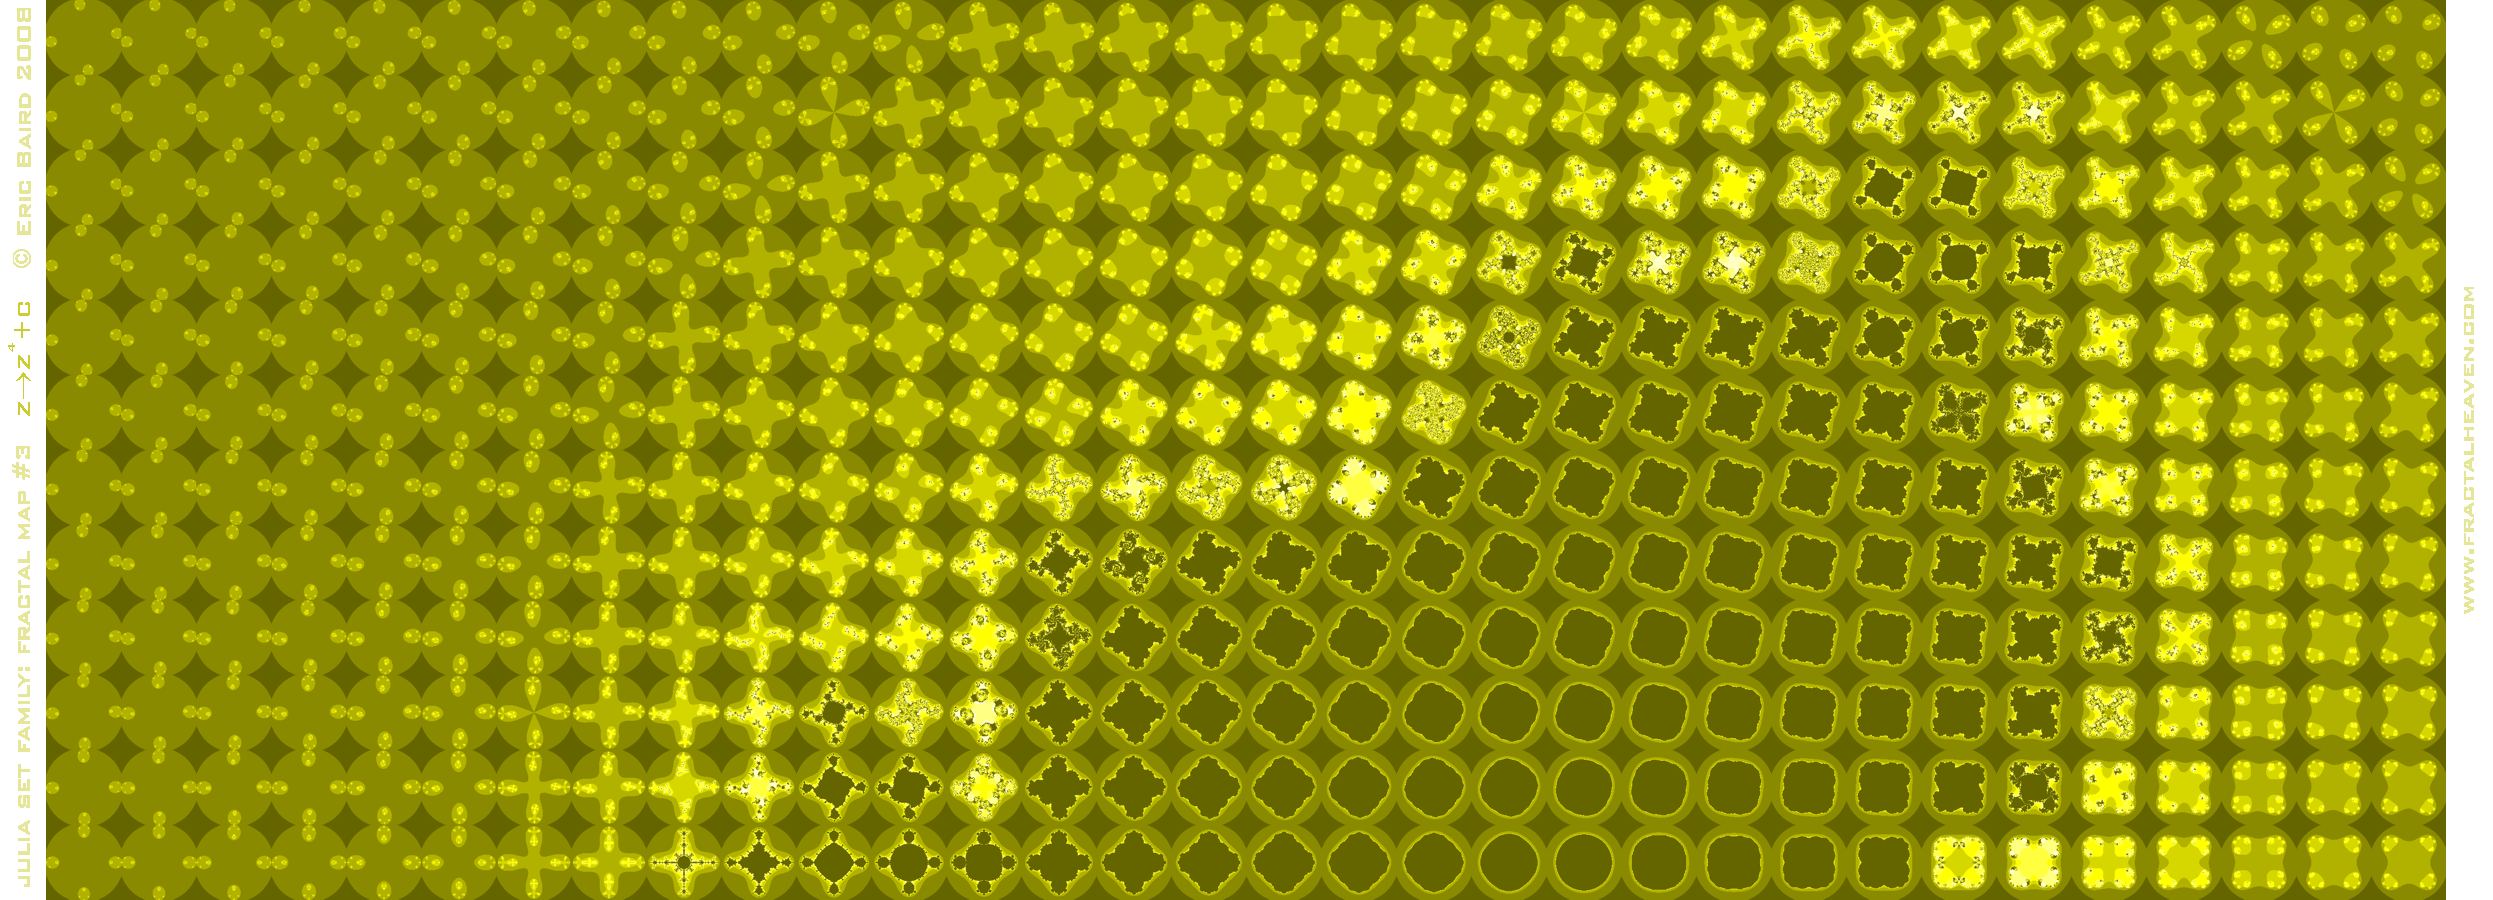 table-array of Julia Set fractal images, for z raised to the fourth power, in yellow